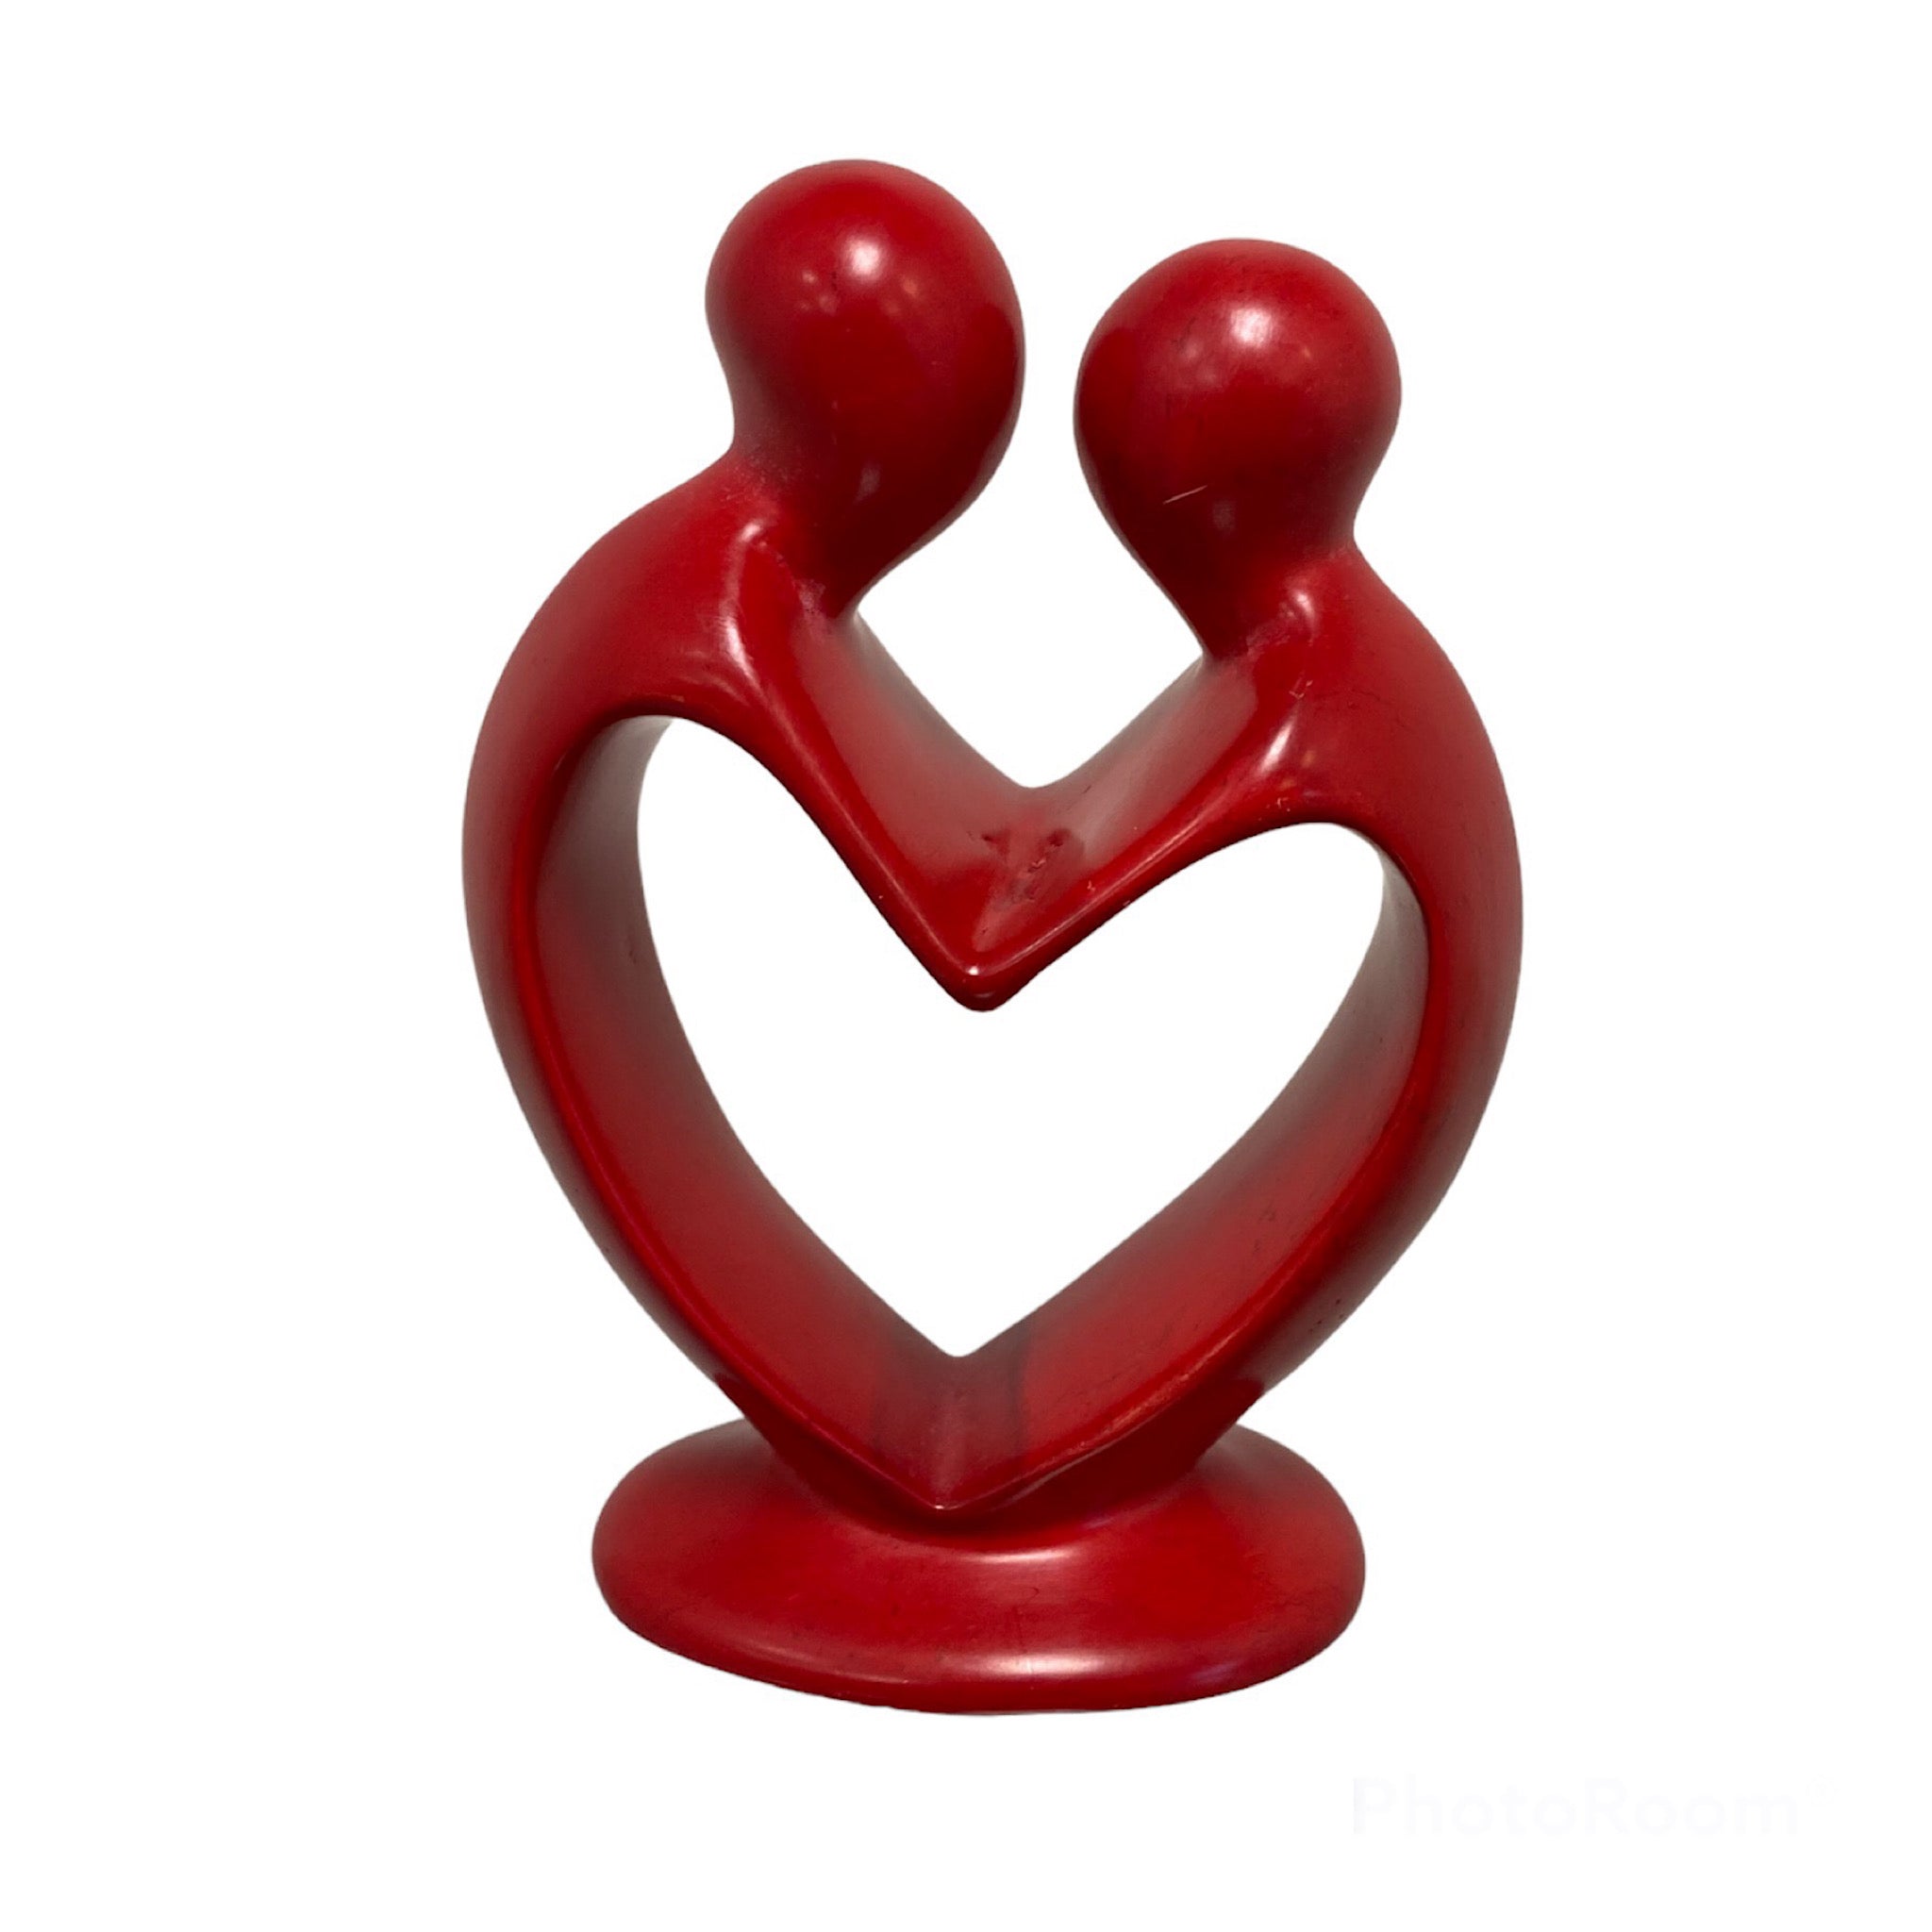 Soapstone Lovers Heart - Soap stone Figurine| Family Carved Sculpture| Kenya Soapstone carving| Family sculpture 4 Inch